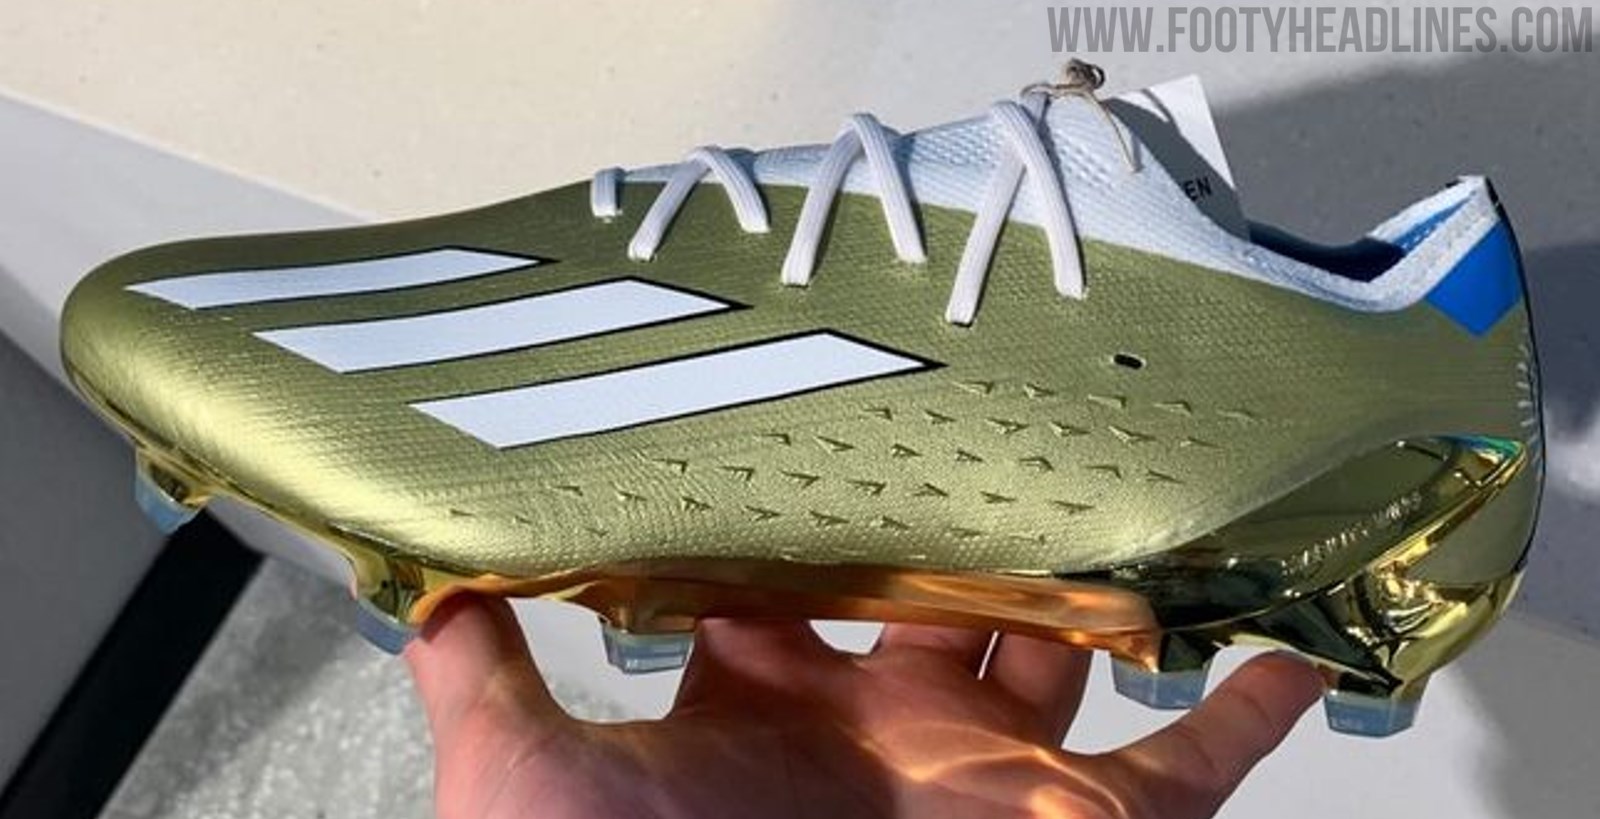 Lionel Messi's World Cup Boots Lionel Messi's boots from Adidas for